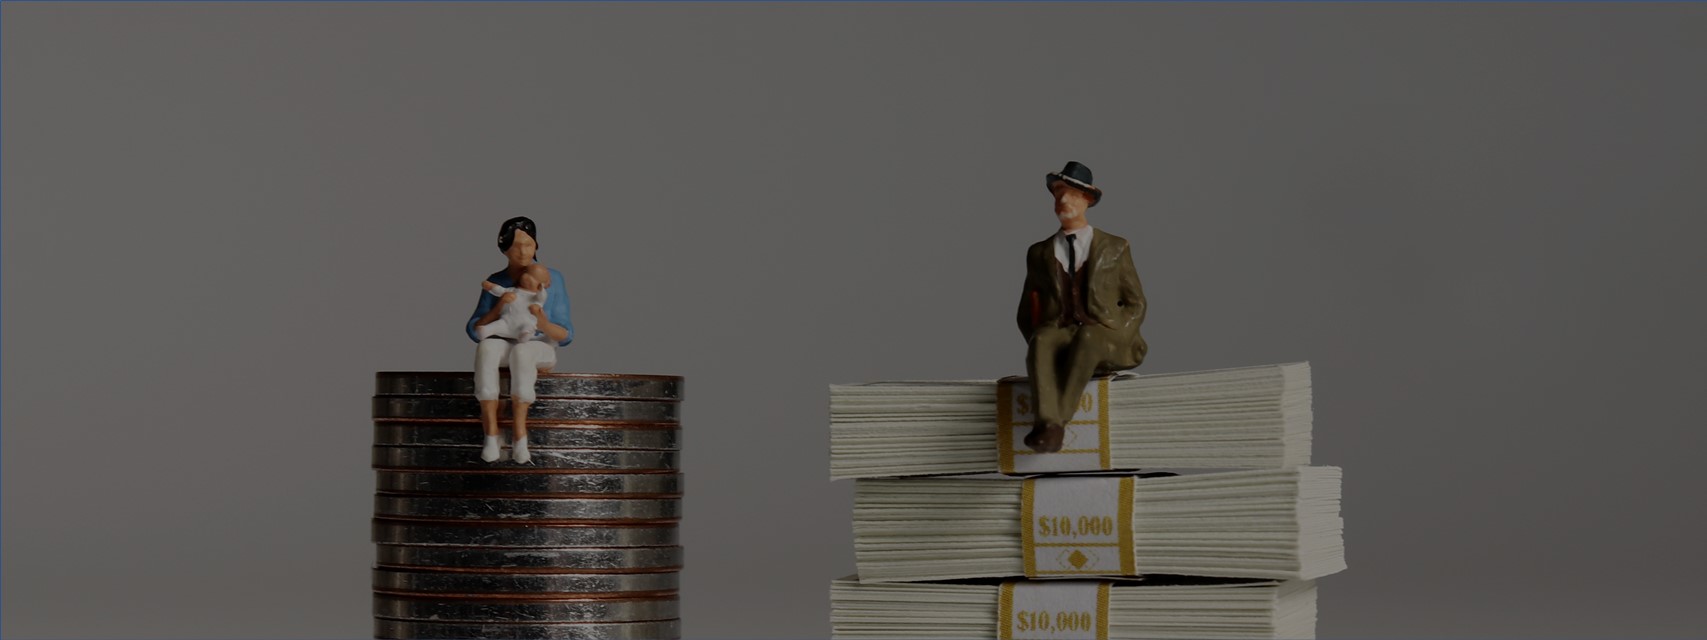 A woman with a baby sitting on a stack of coins and a man in a suit sitting on a stack of $10,000 packets of bills.